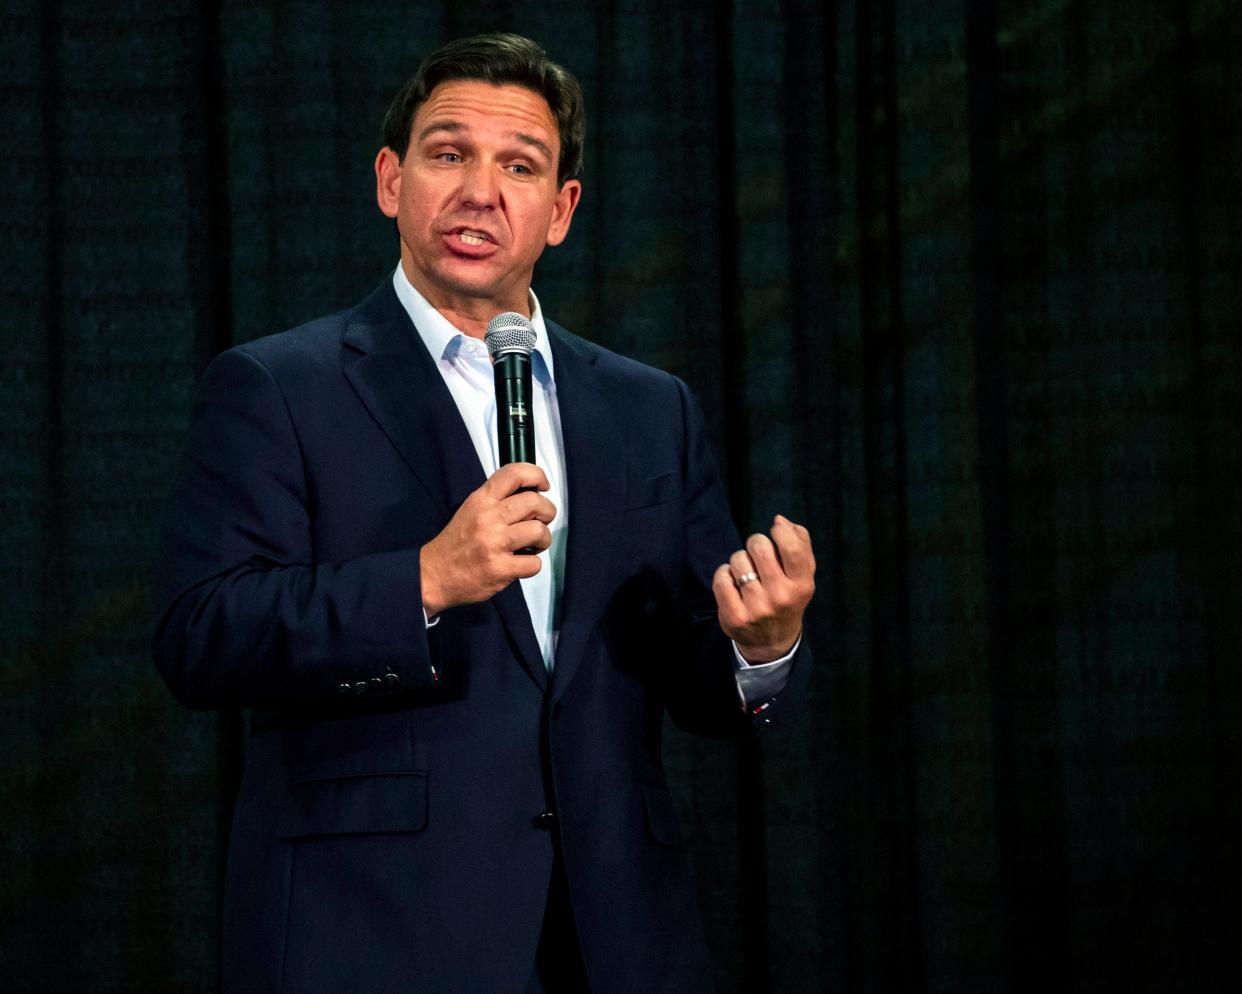 Florida Gov. Ron DeSantis speaks during U.S. Rep. Mariannette Miller-Meeks', R-Iowa, Triple MMM Tailgate event in Iowa City, Iowa on Friday, Oct. 20, 2023. The event featured remarks from several candidates for the Republican Party's nomination for President. (Nick Rohlman/The Gazette via AP)